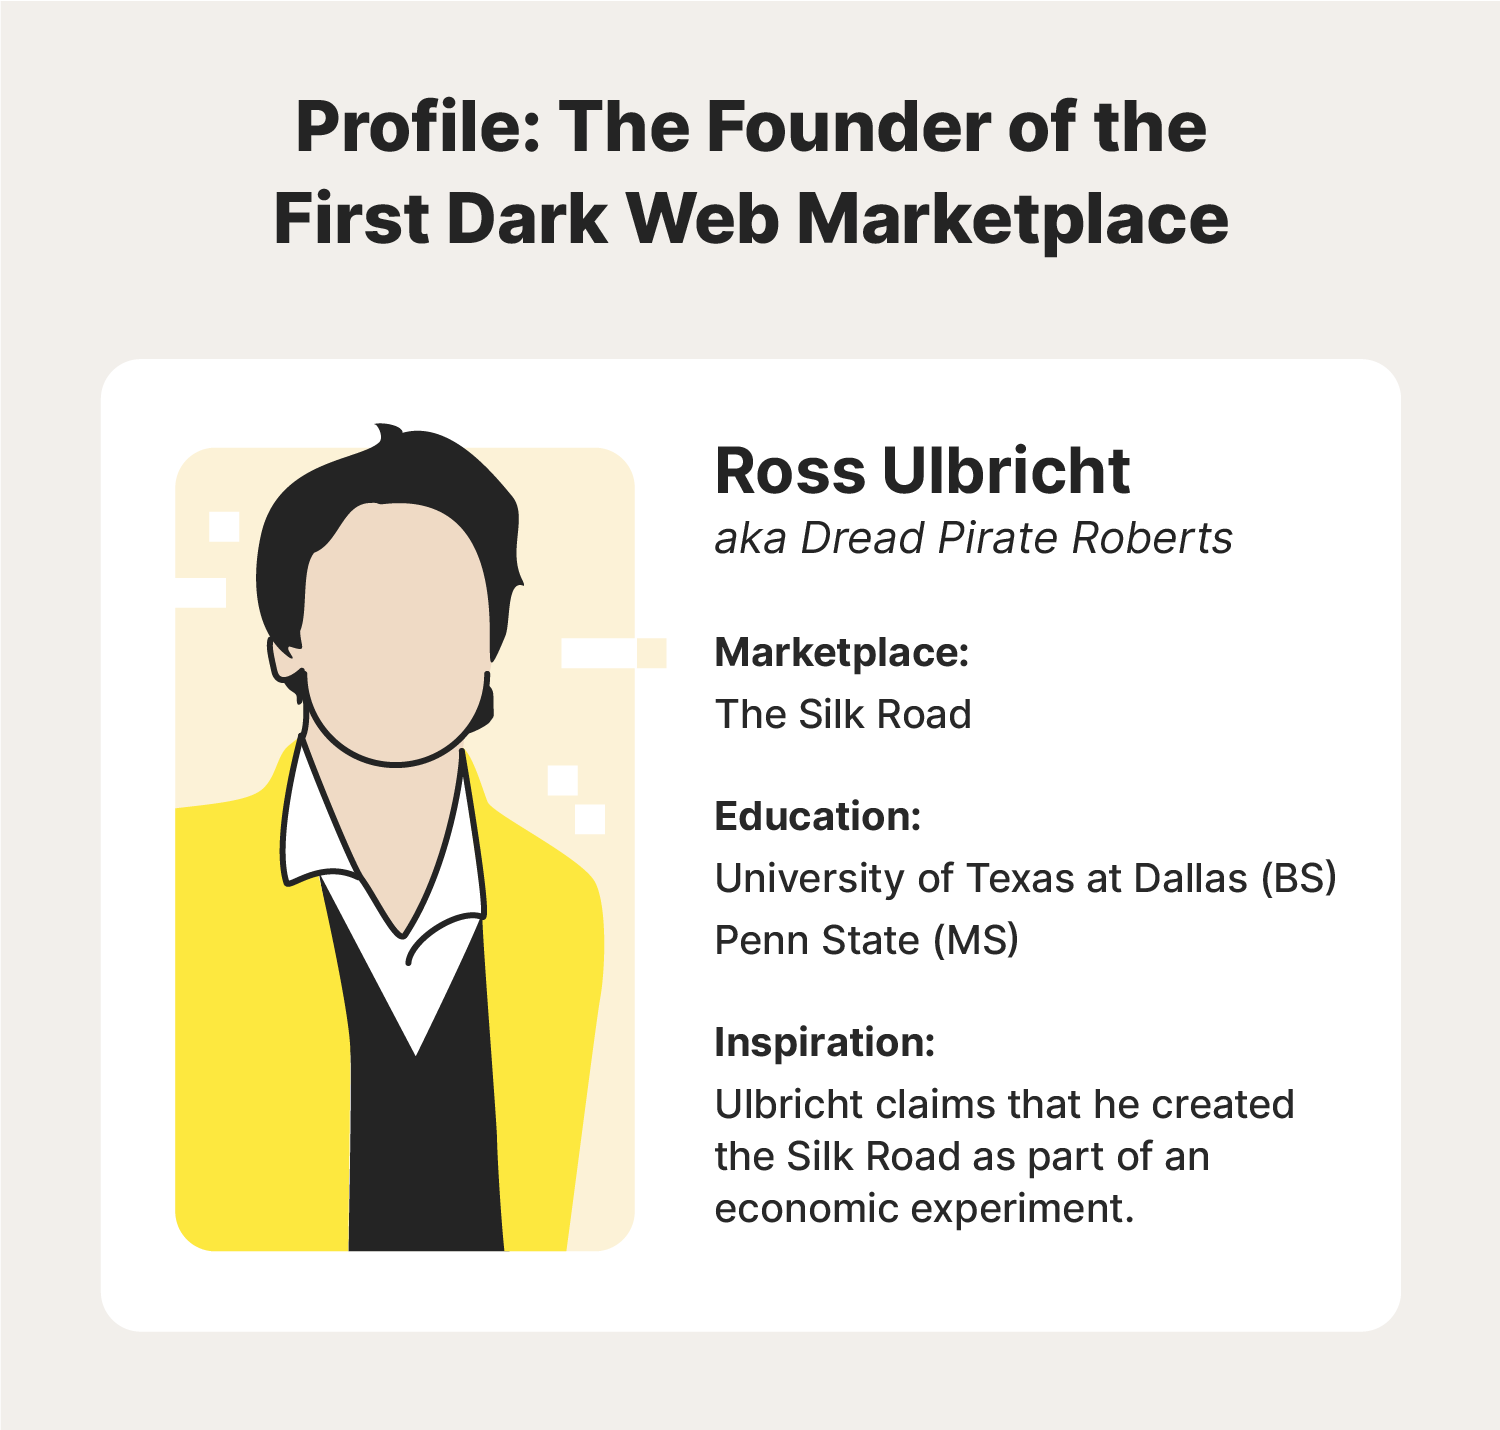 Details about the founder of the Silk Road’s background and inspiration.